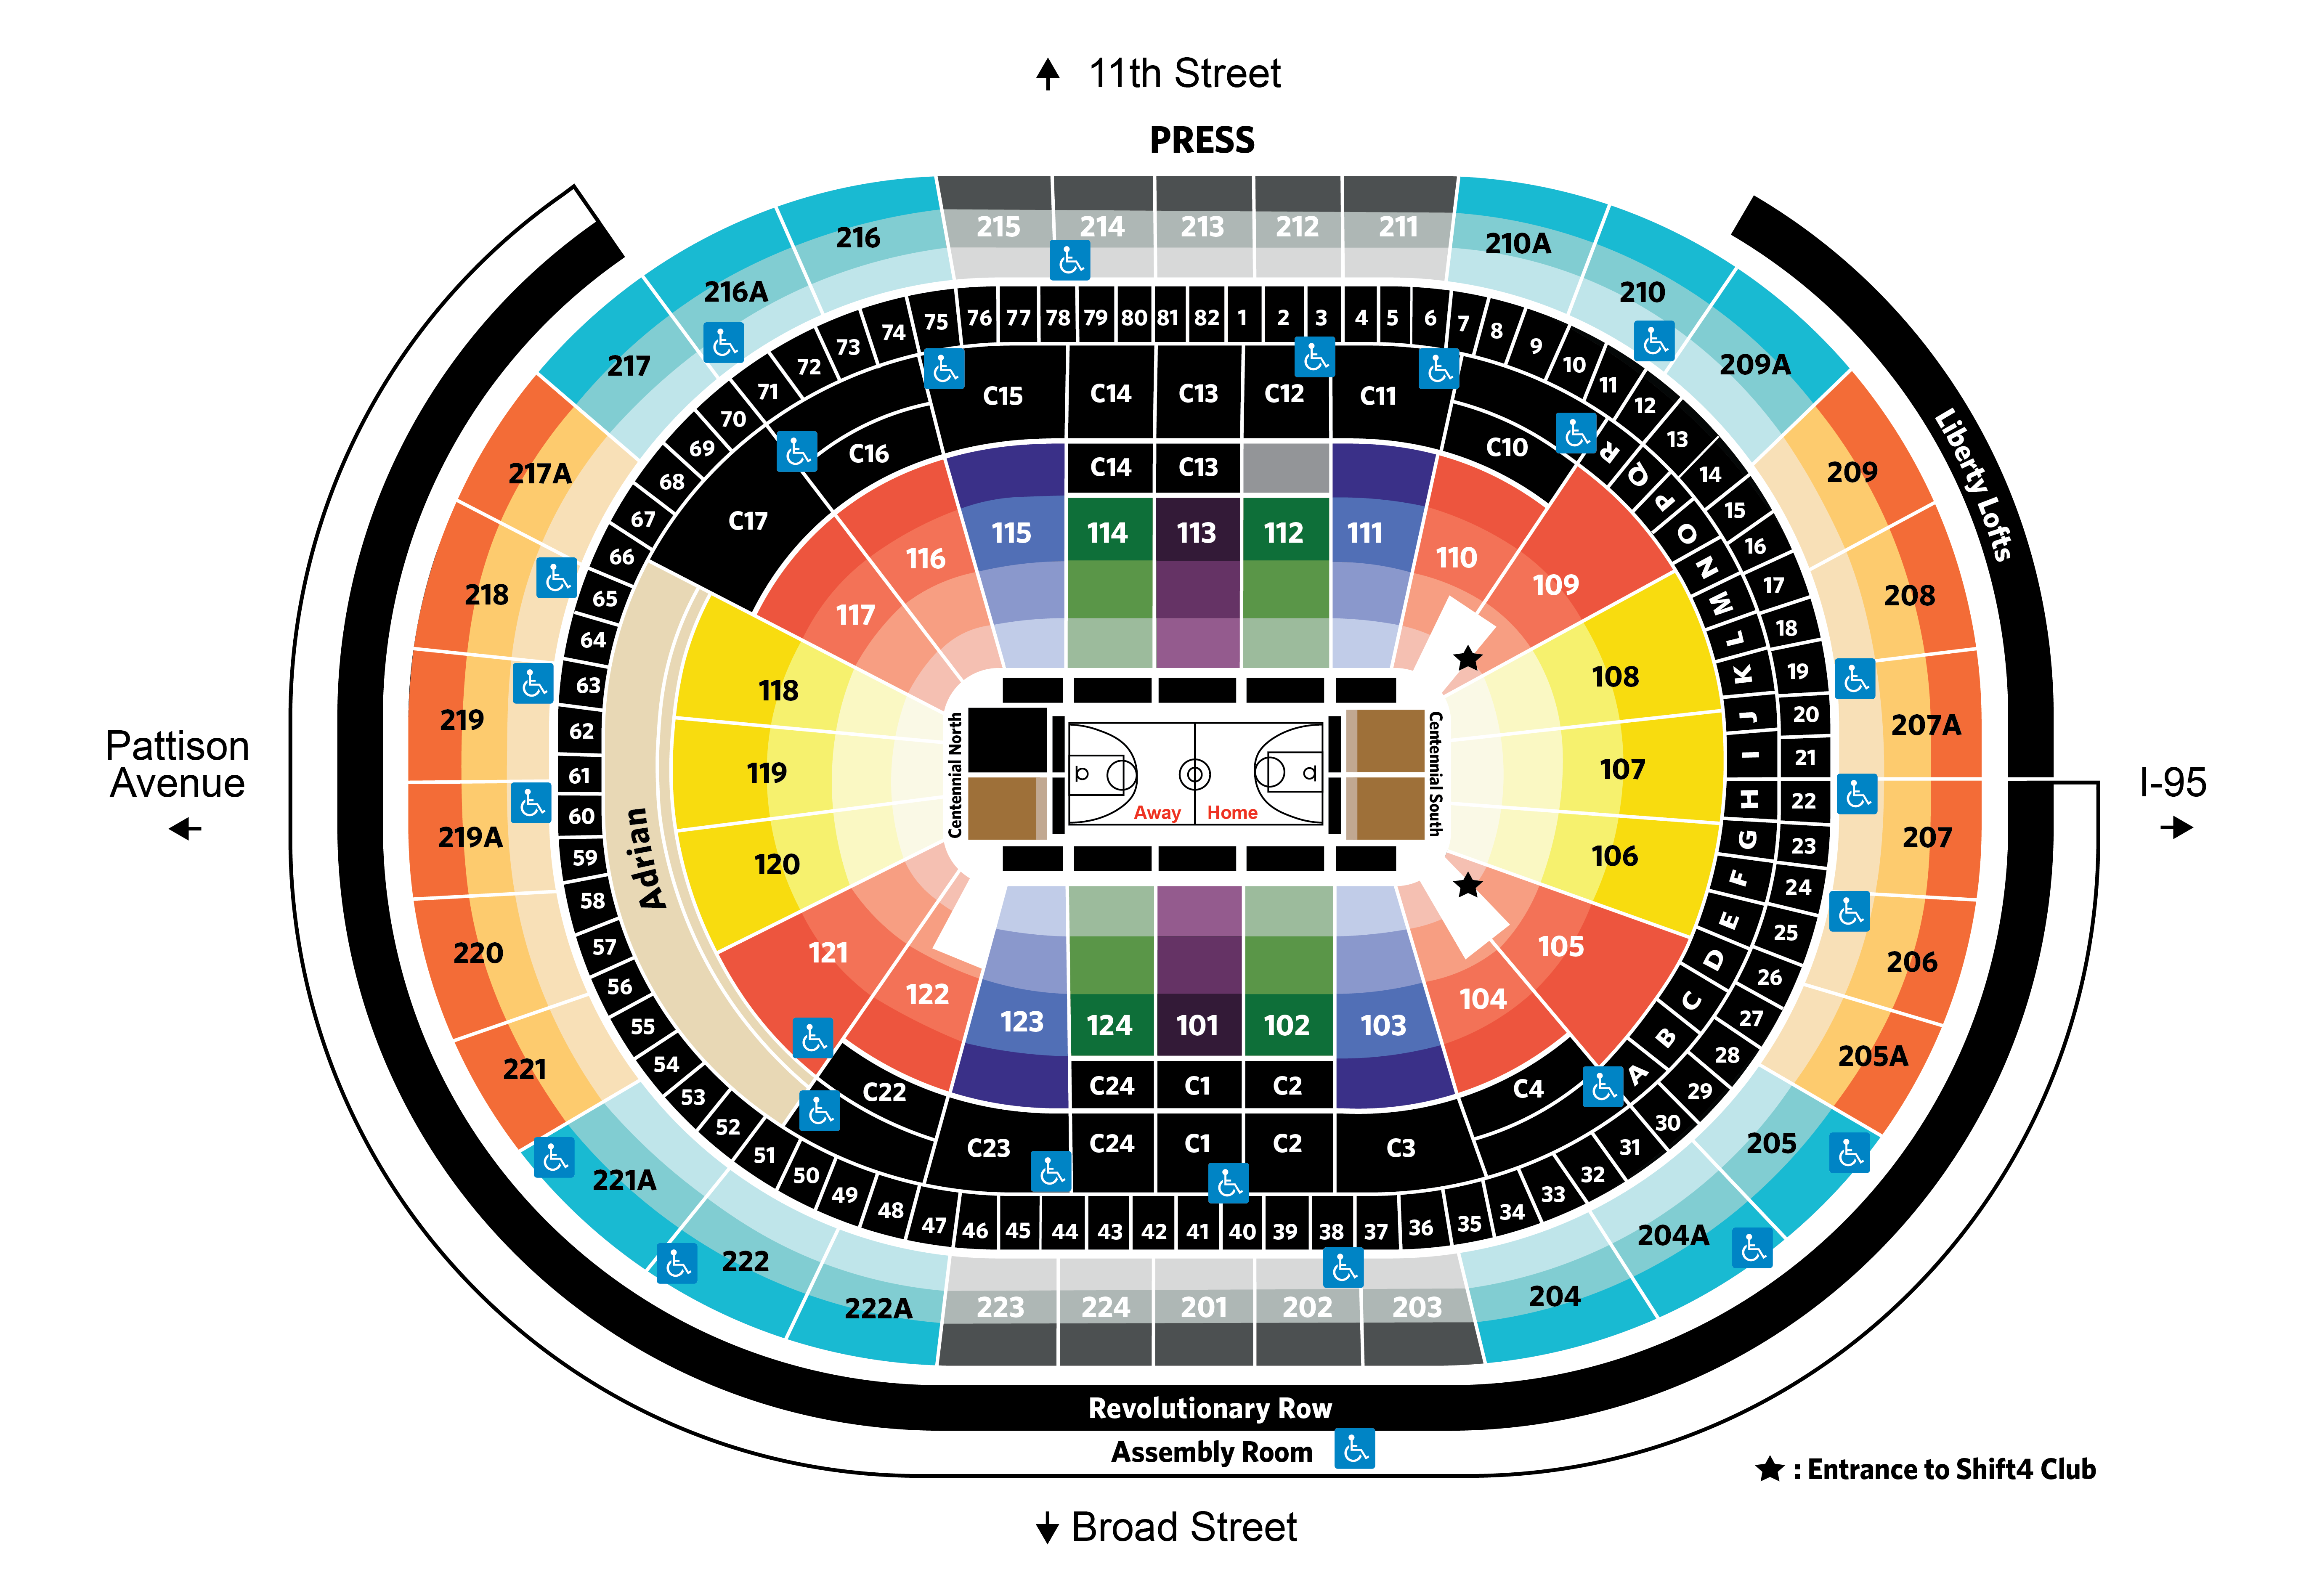 How To Find Assembly Room And Revolutionary Row Tickets At Wells Fargo  Center